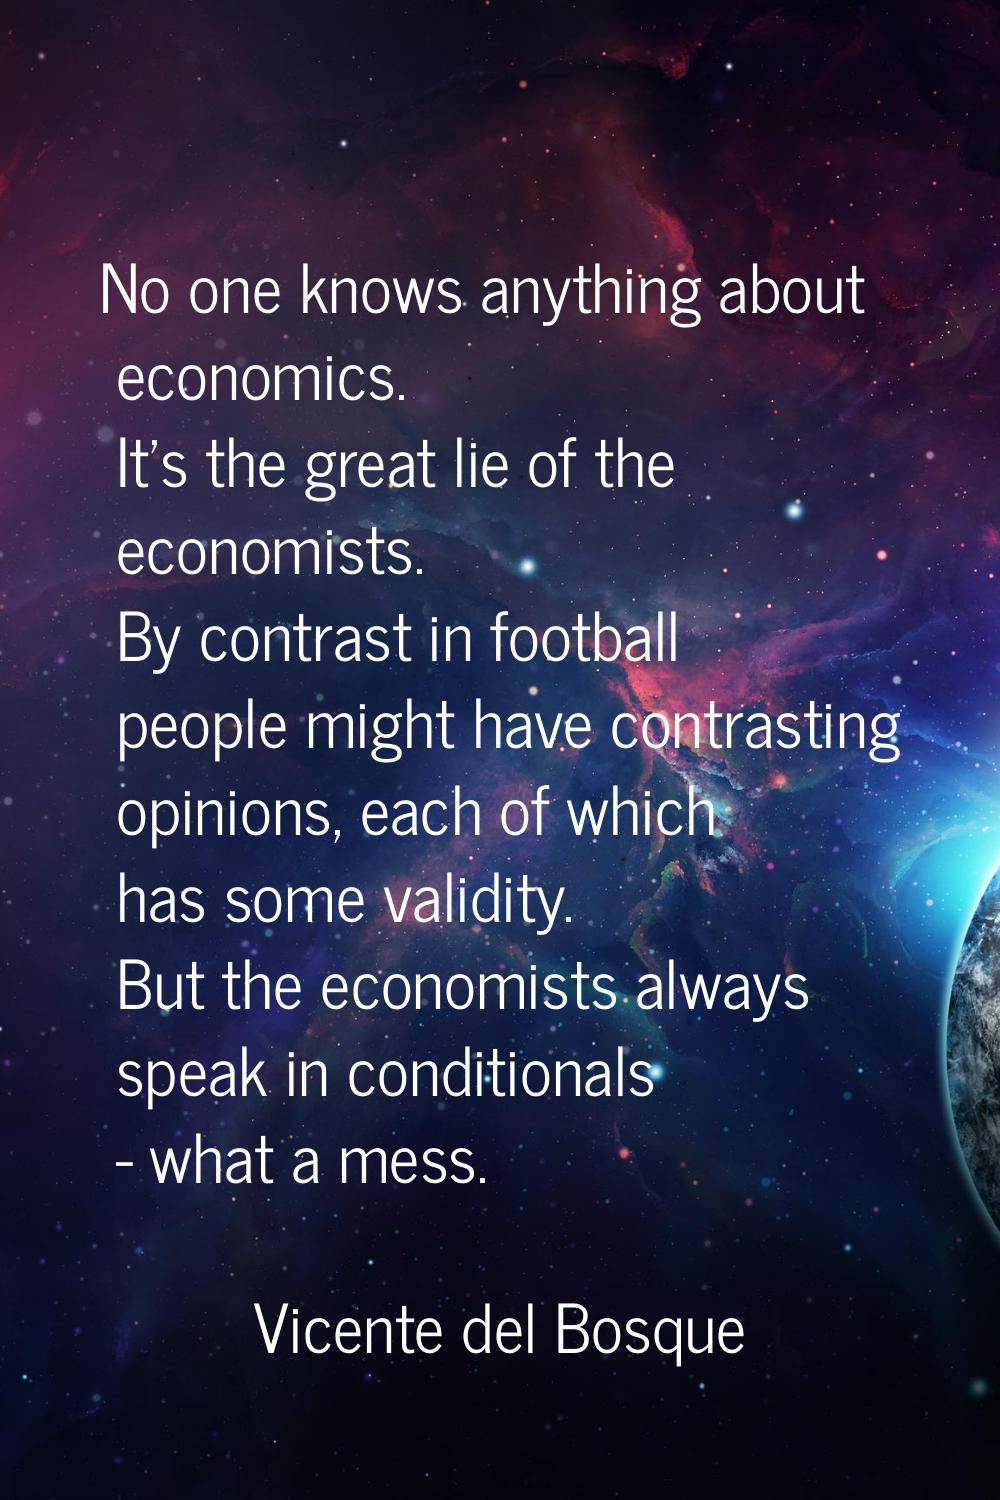 No one knows anything about economics. It's the great lie of the economists. By contrast in footbal